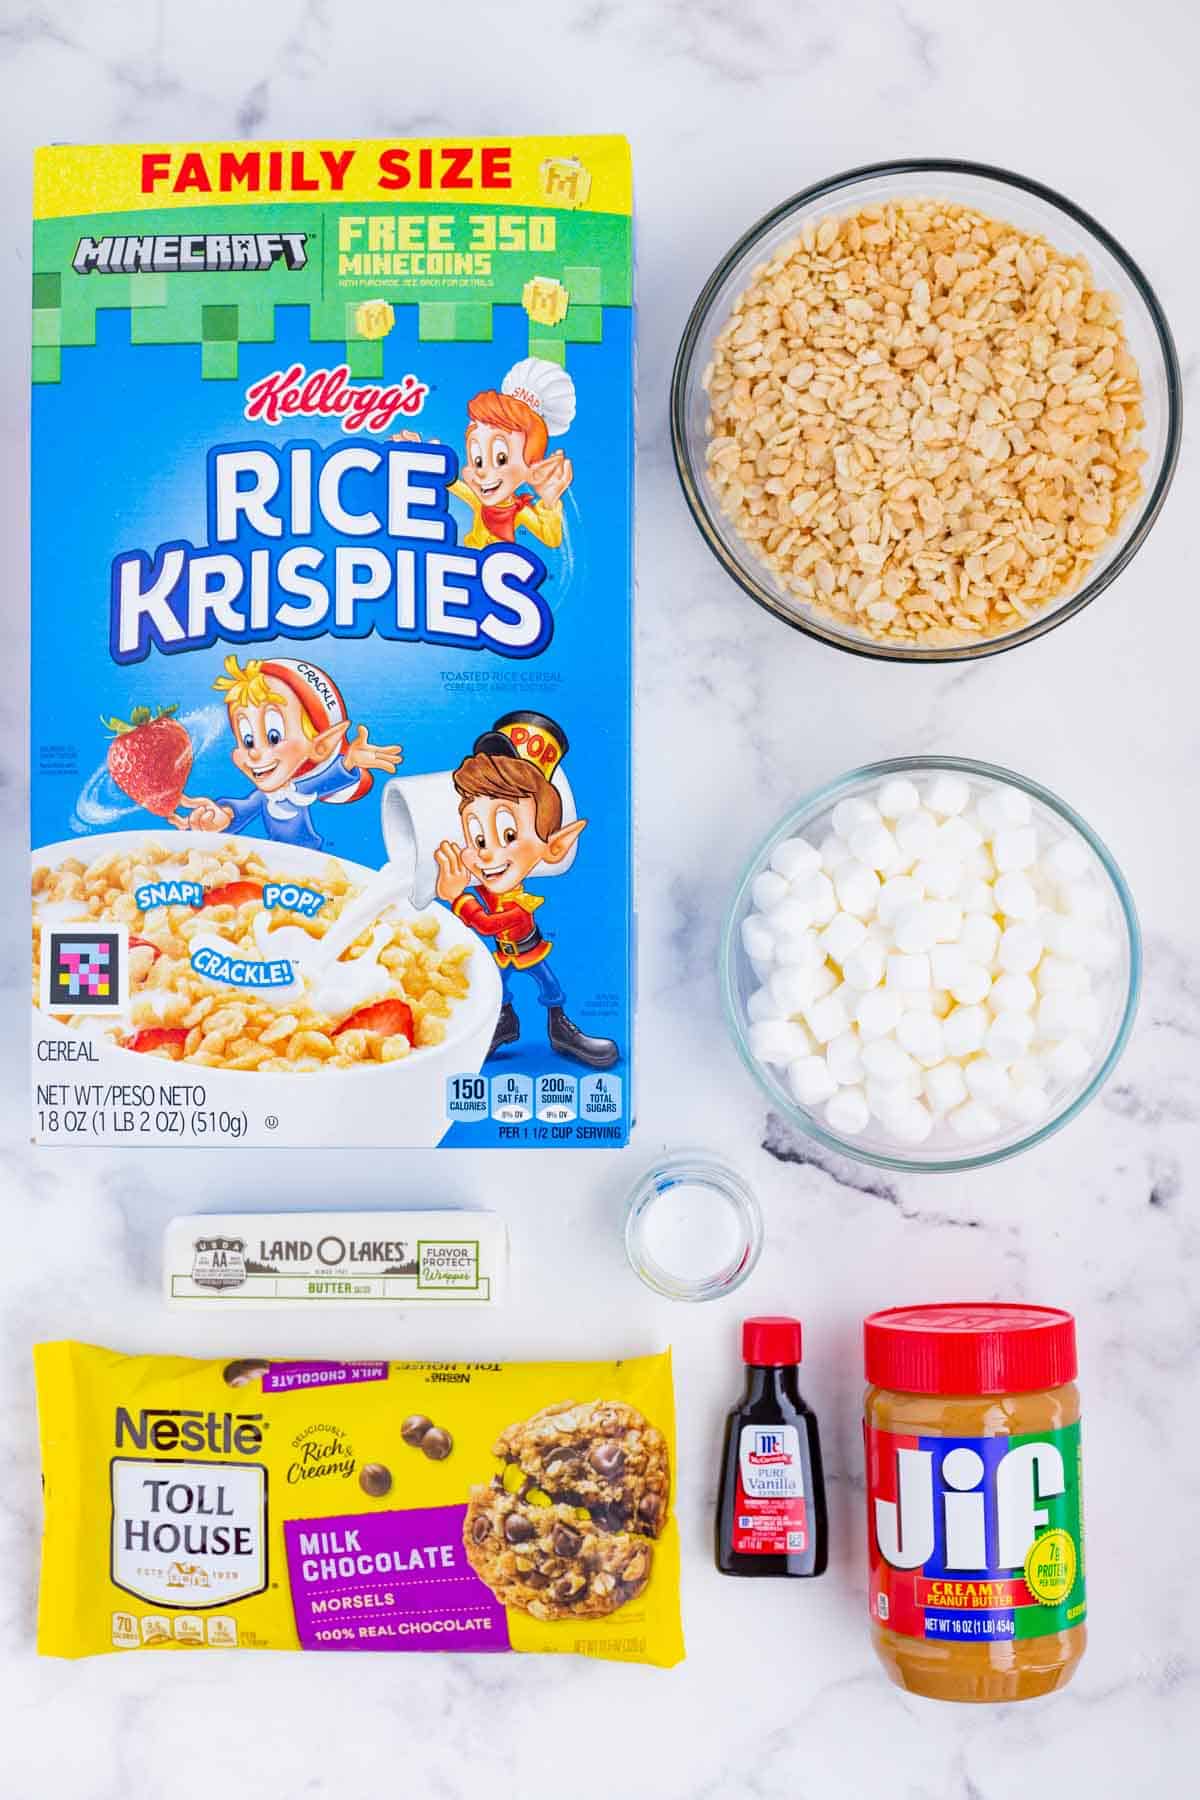 Rice Krispies, peanut butter, vanilla, marshmallows, salt, butter, and chocolate are the ingredients needed.